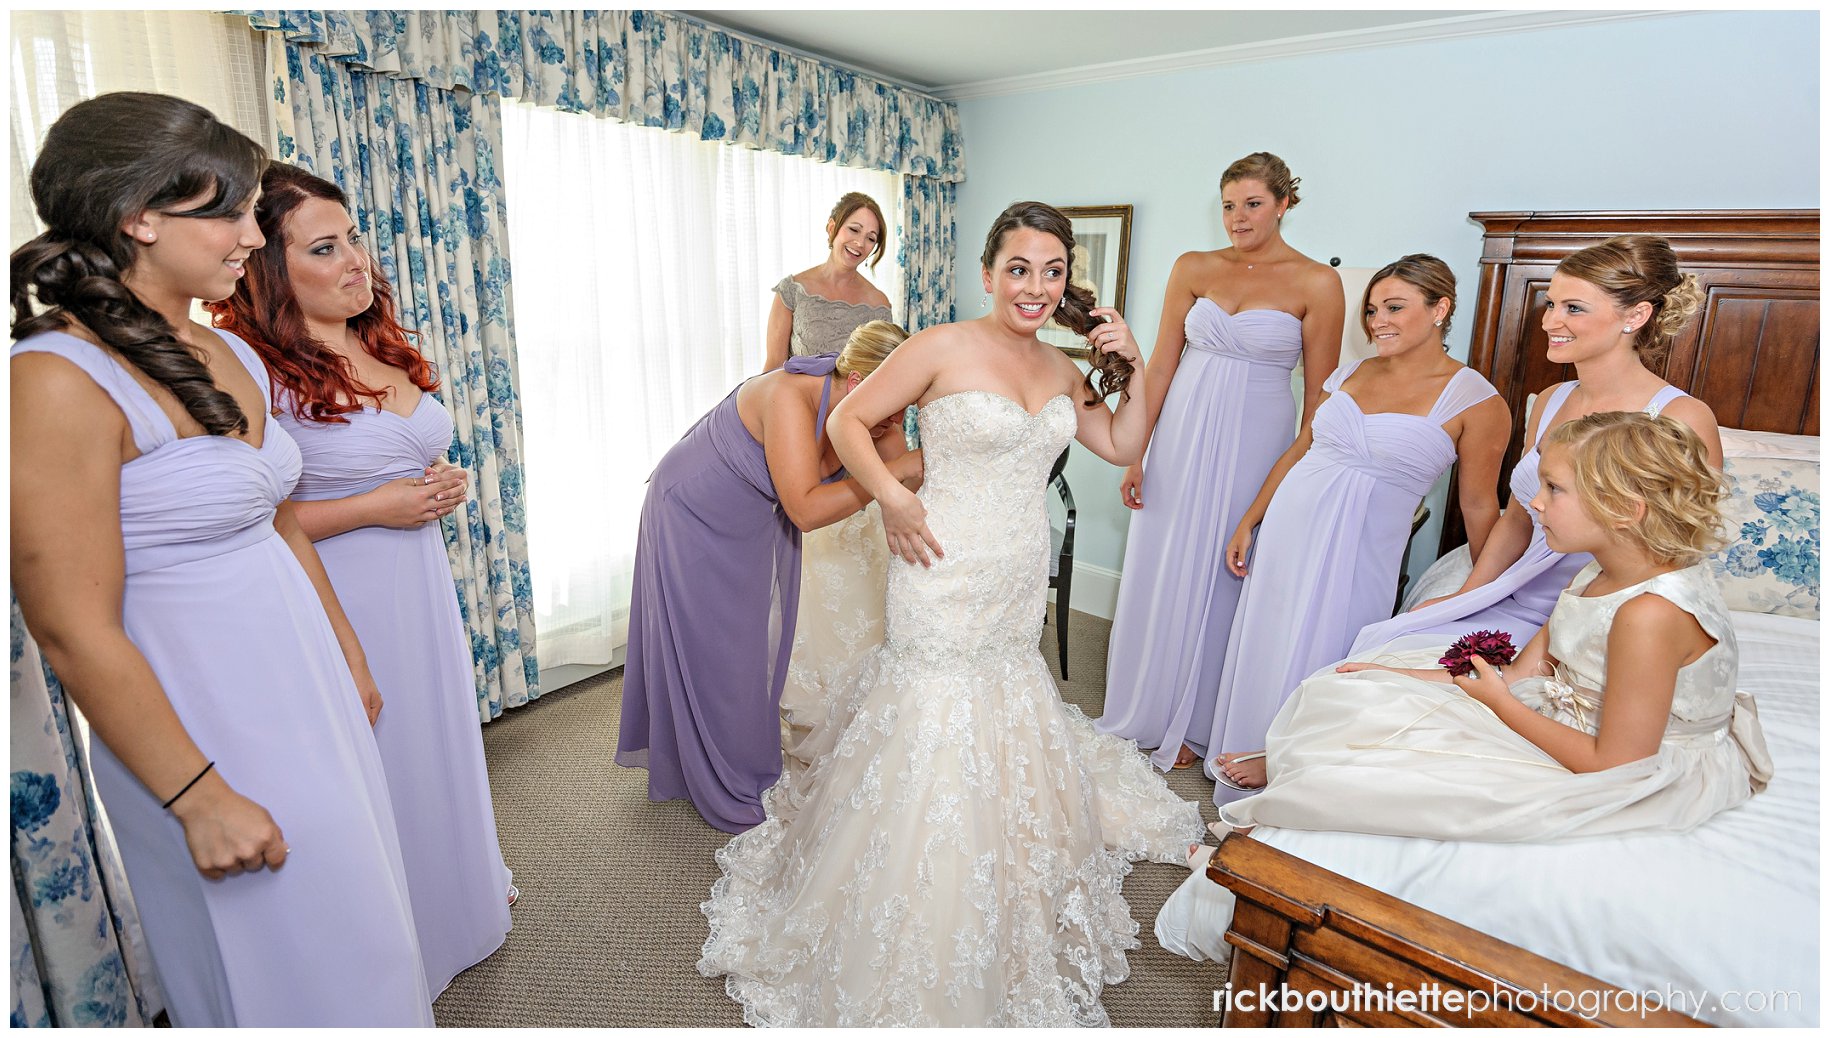 bride getting ready with bridesmaids looking on